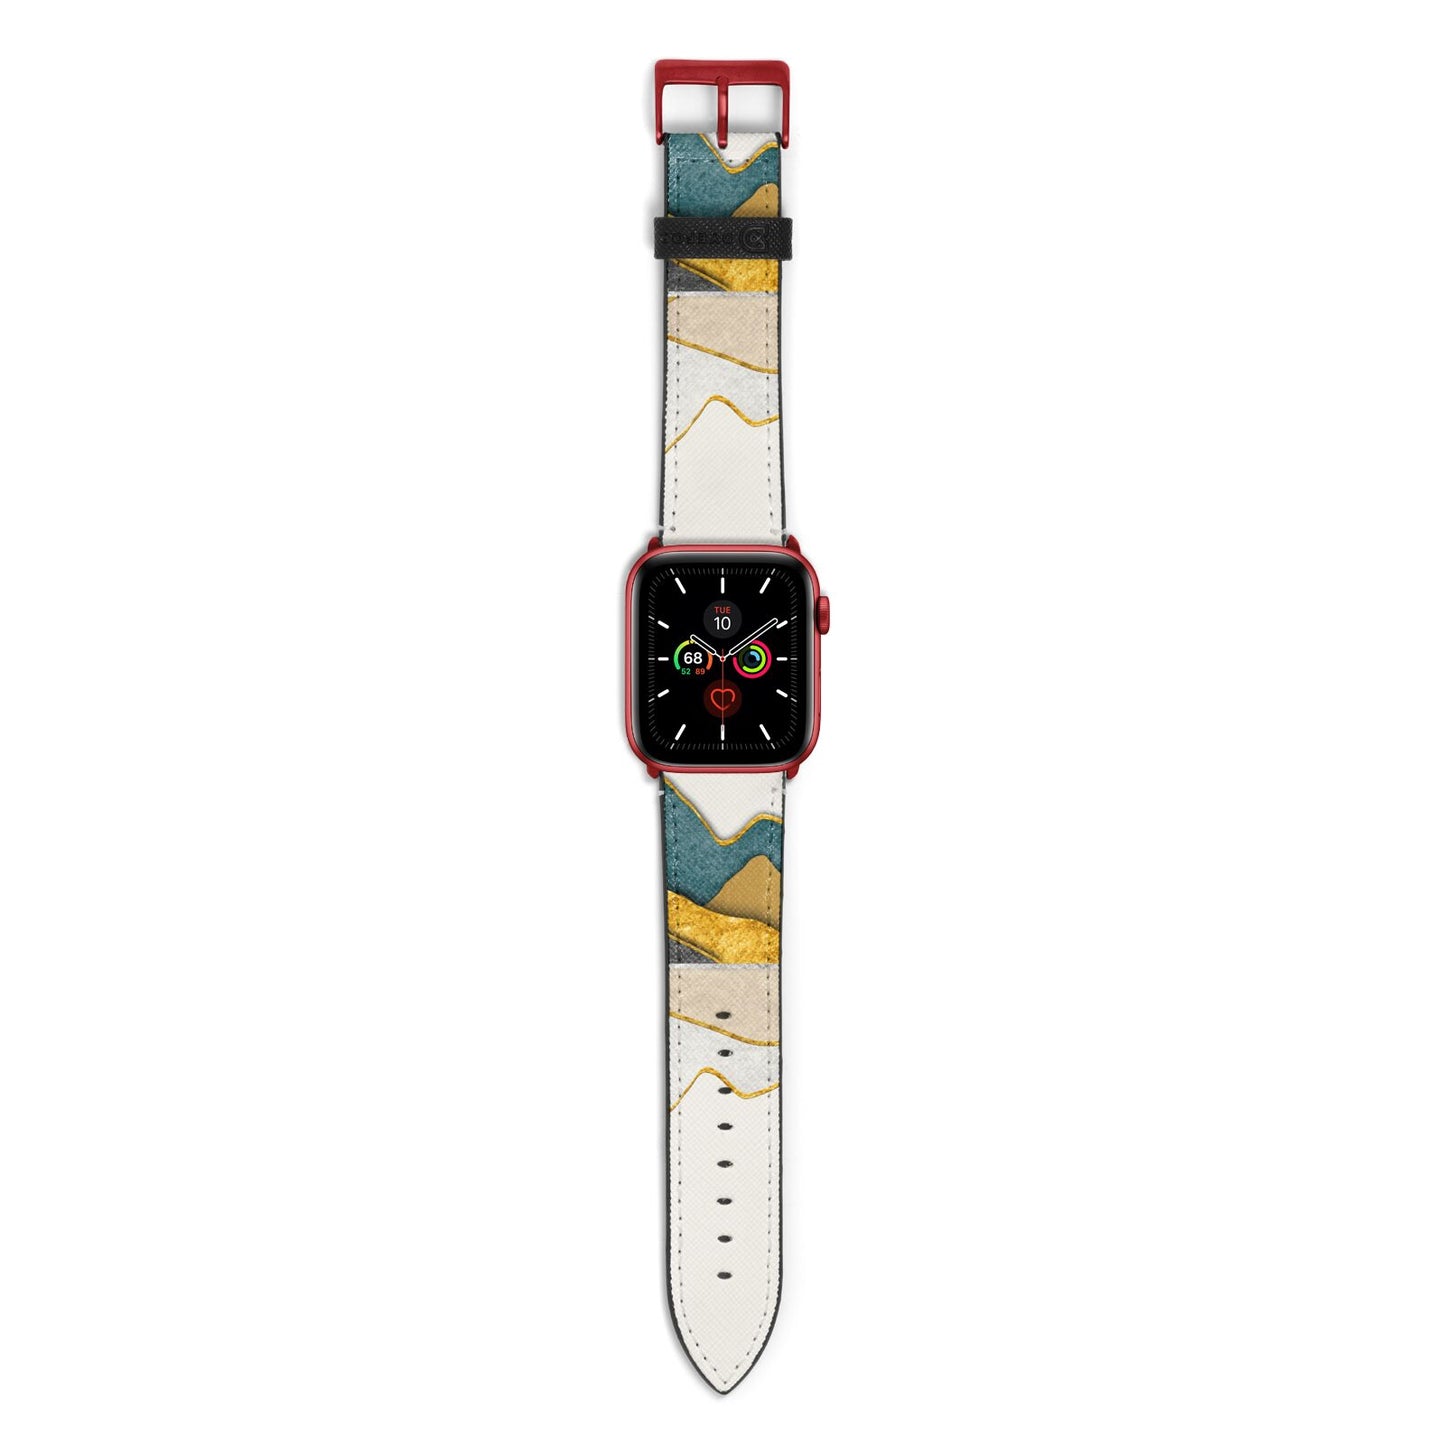 Abstract Mountain Apple Watch Strap with Red Hardware